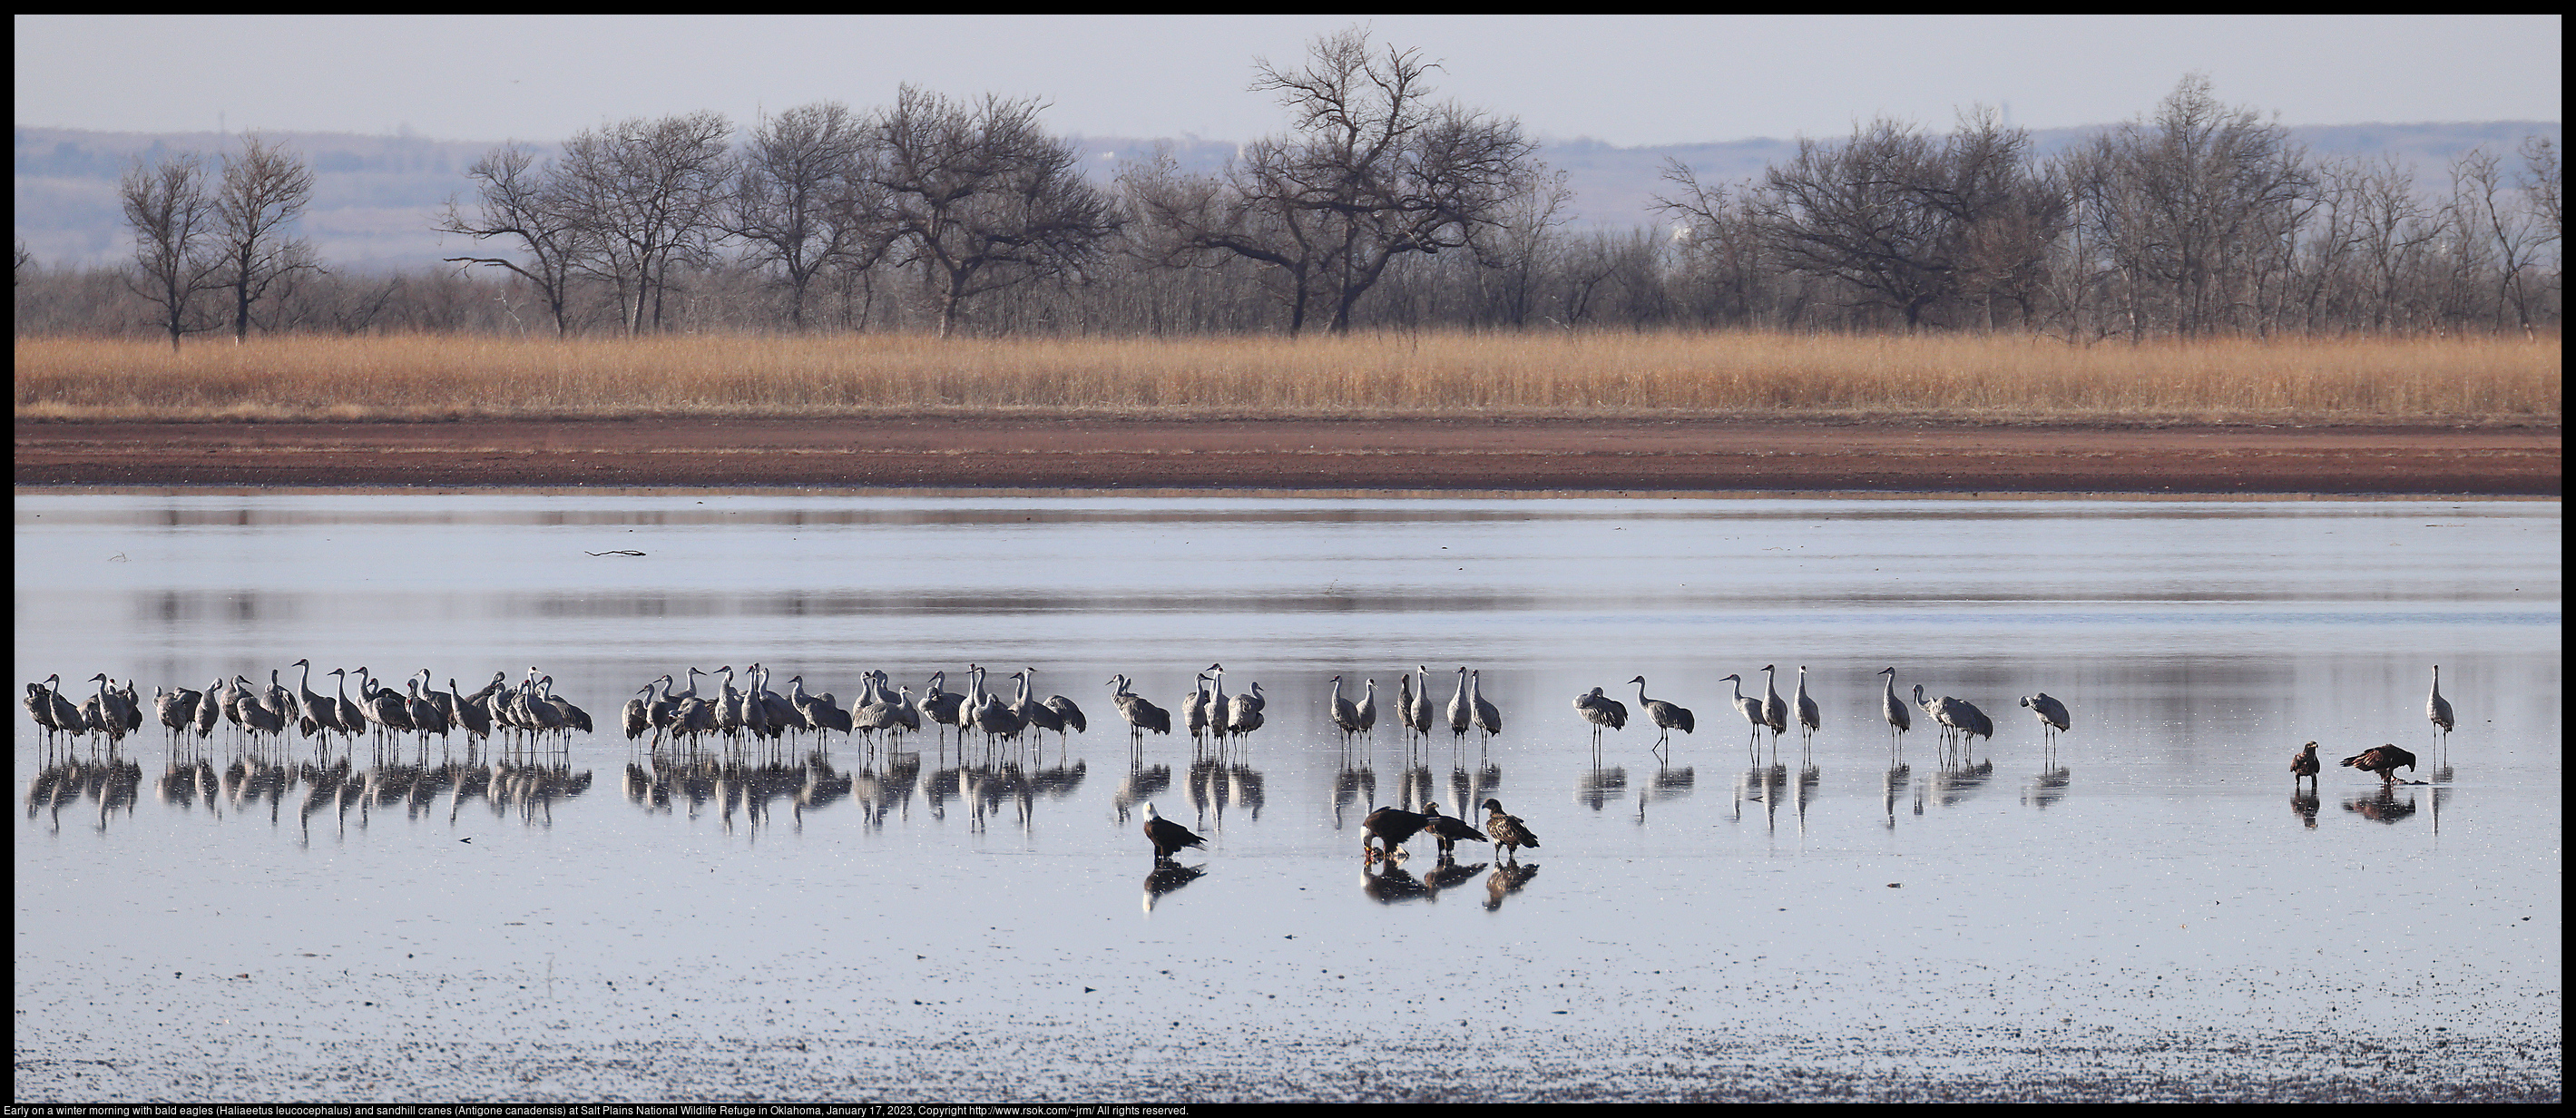 Early on a winter morning with bald eagles (Haliaeetus leucocephalus) and sandhill cranes (Antigone canadensis) at Salt Plains National Wildlife Refuge in Oklahoma, January 17, 2023